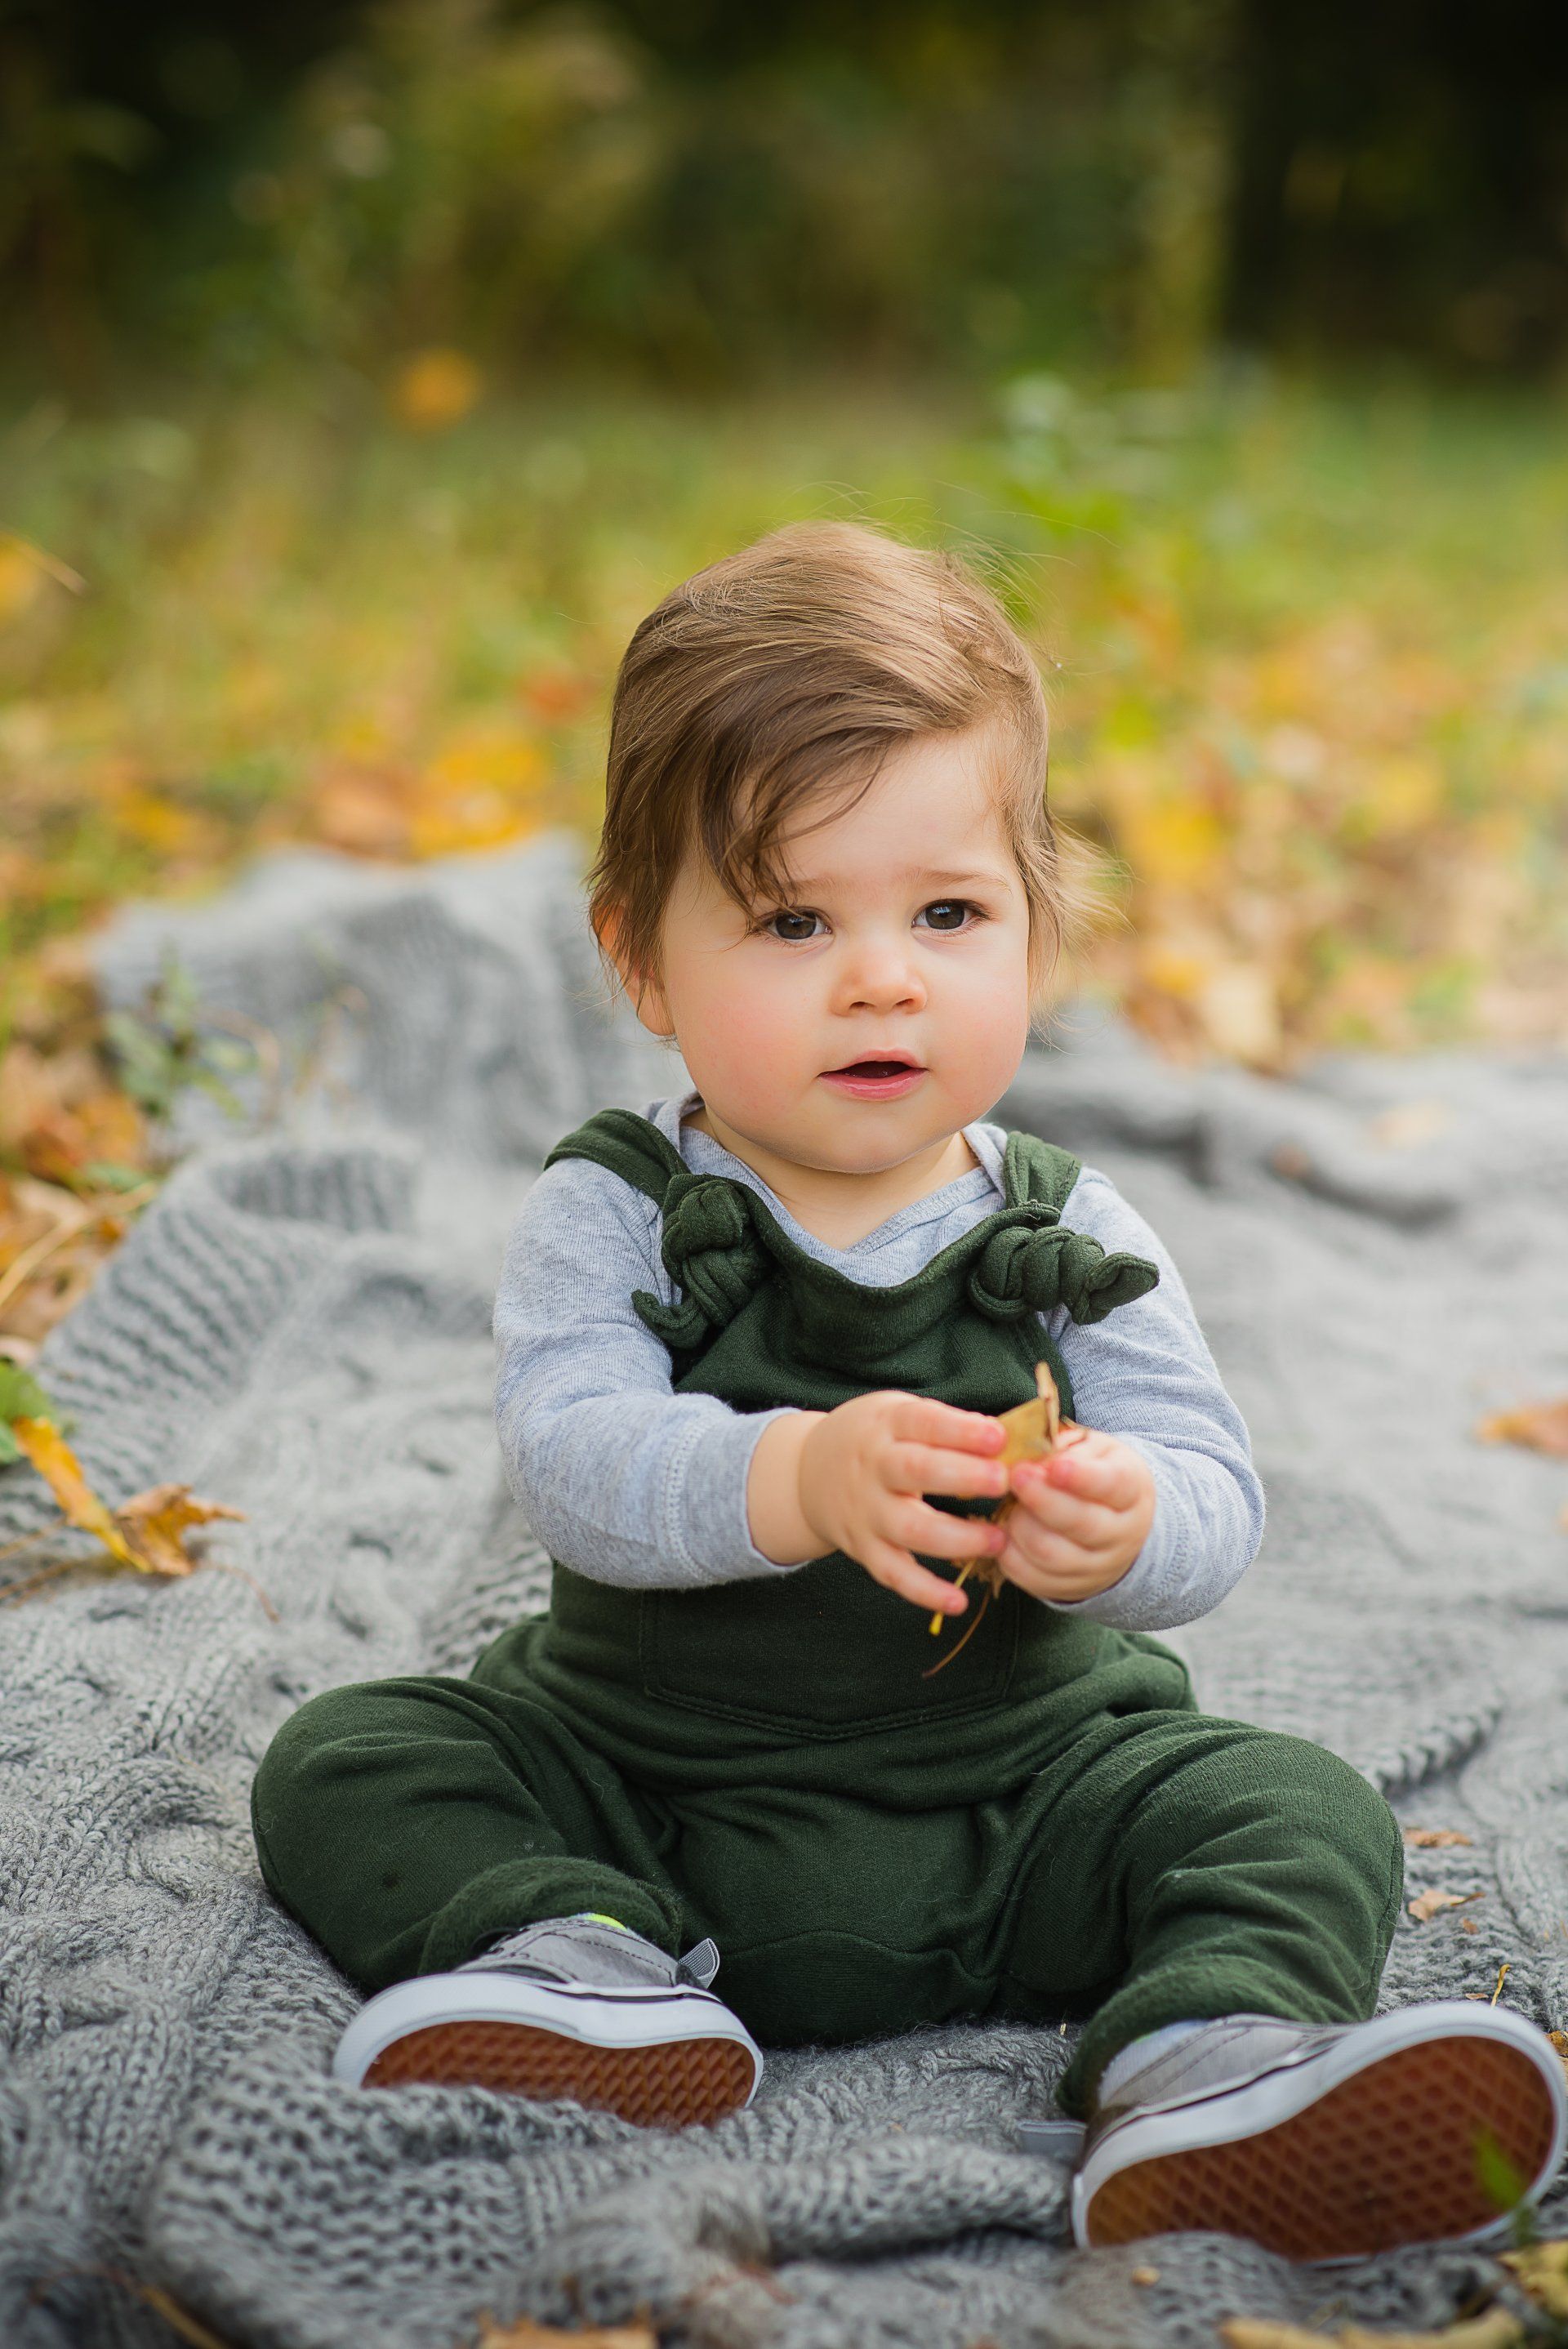 Seated toddler | Child photography | Stacey Naglie Toronto